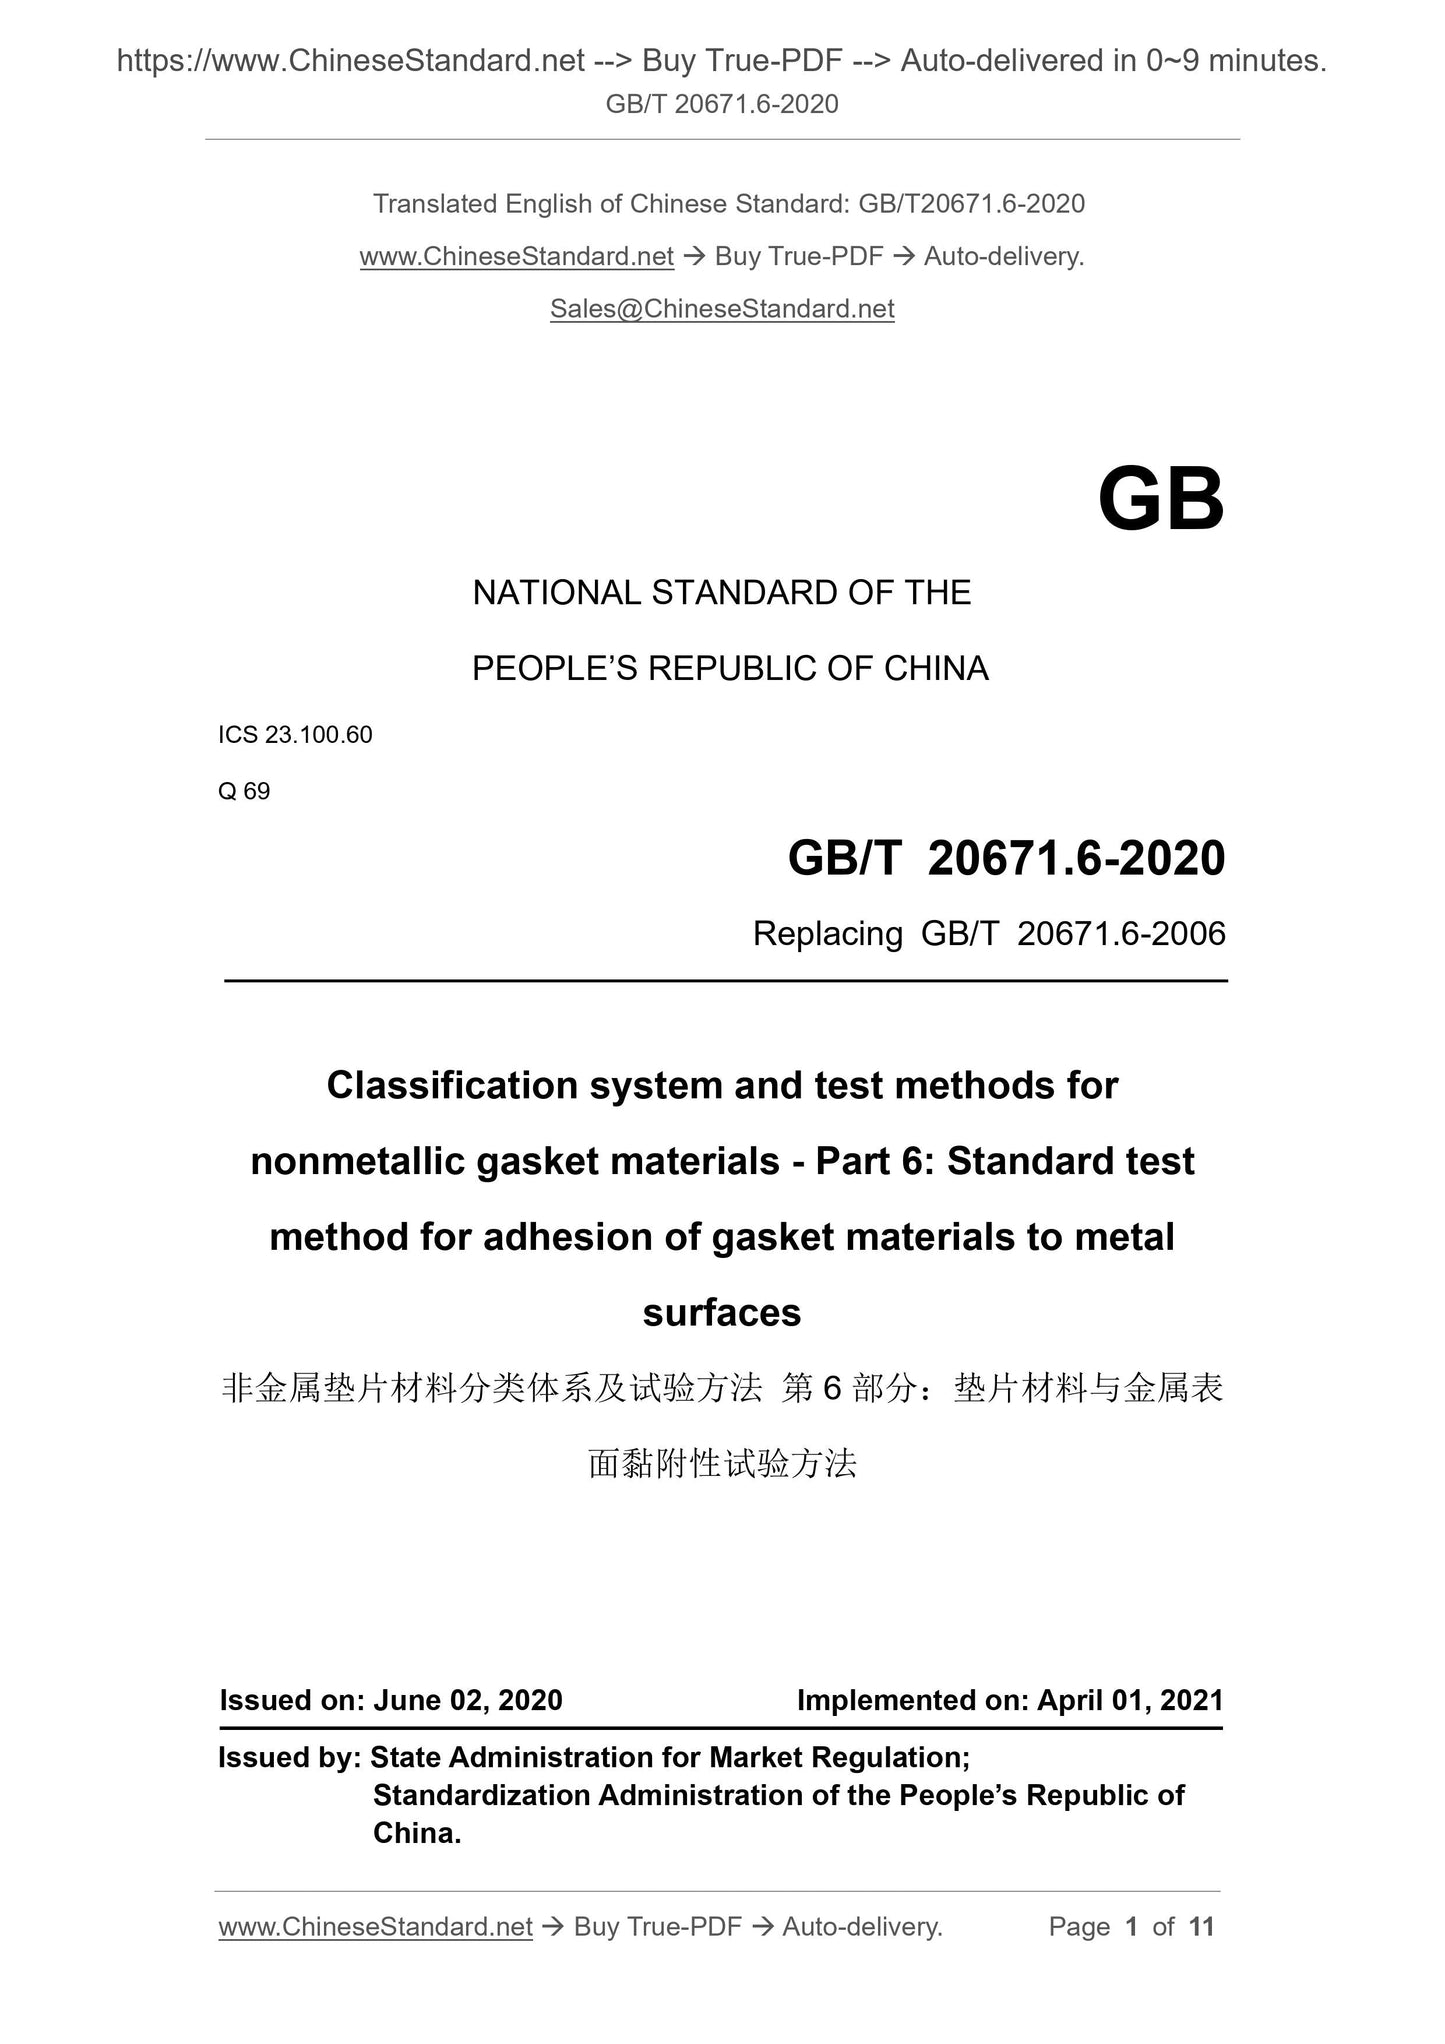 GB/T 20671.6-2020 Page 1